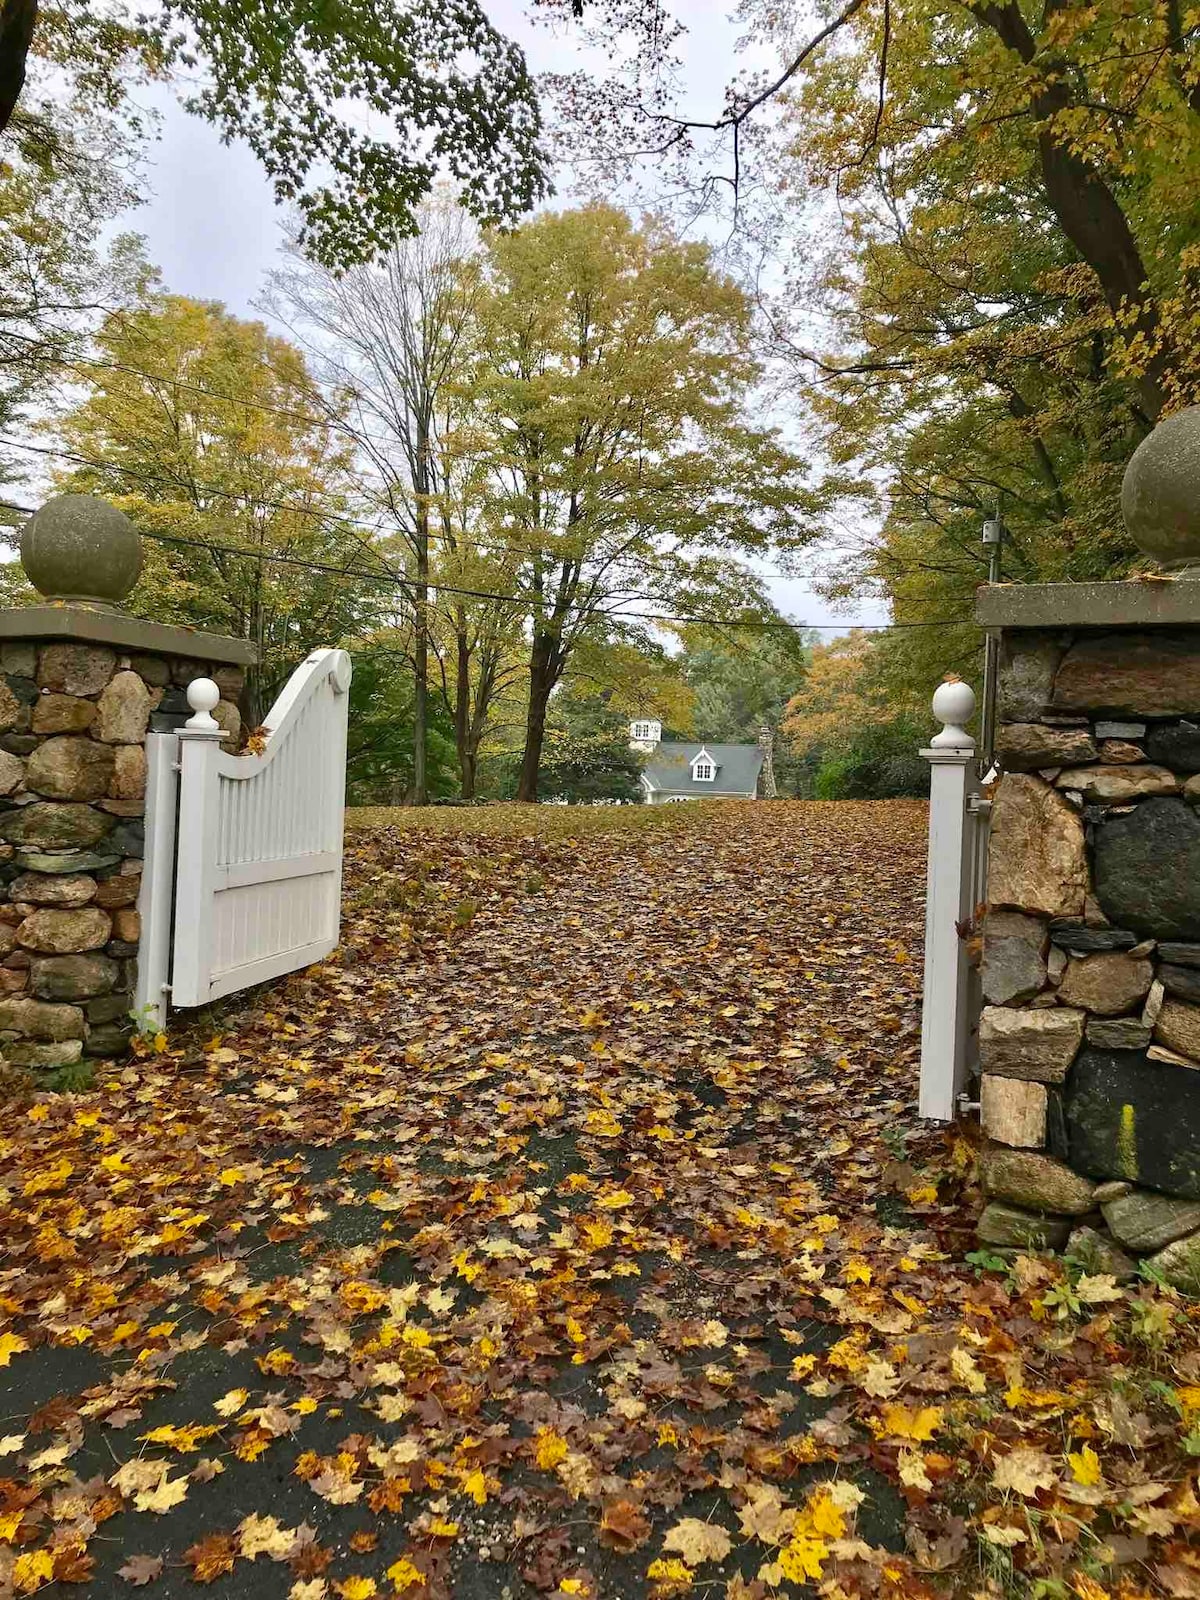 Enjoy our Connecticut Carriage House